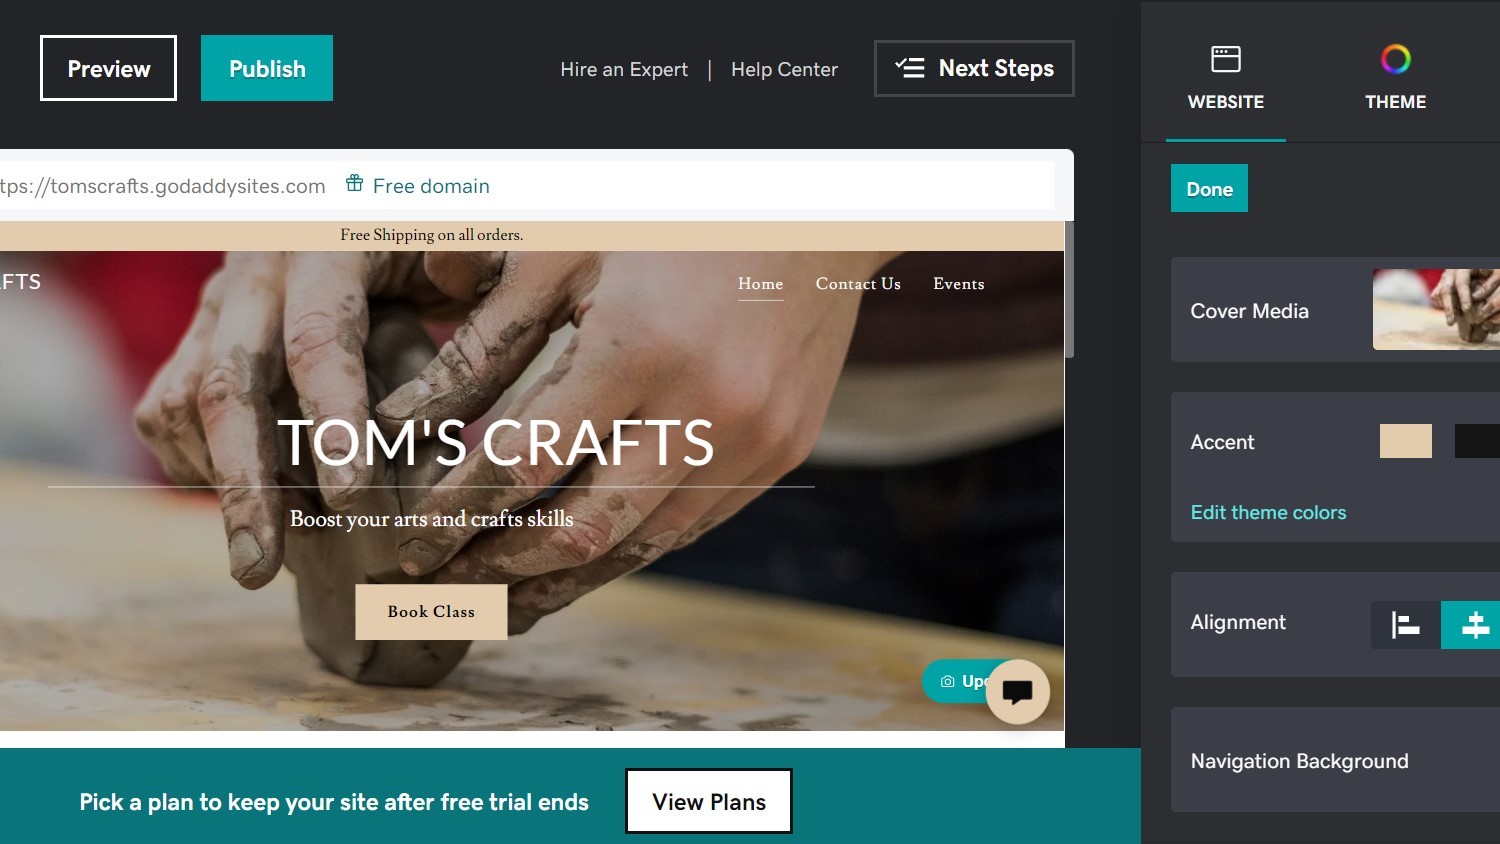 Building website for Tom's Crafts in GoDaddy interface